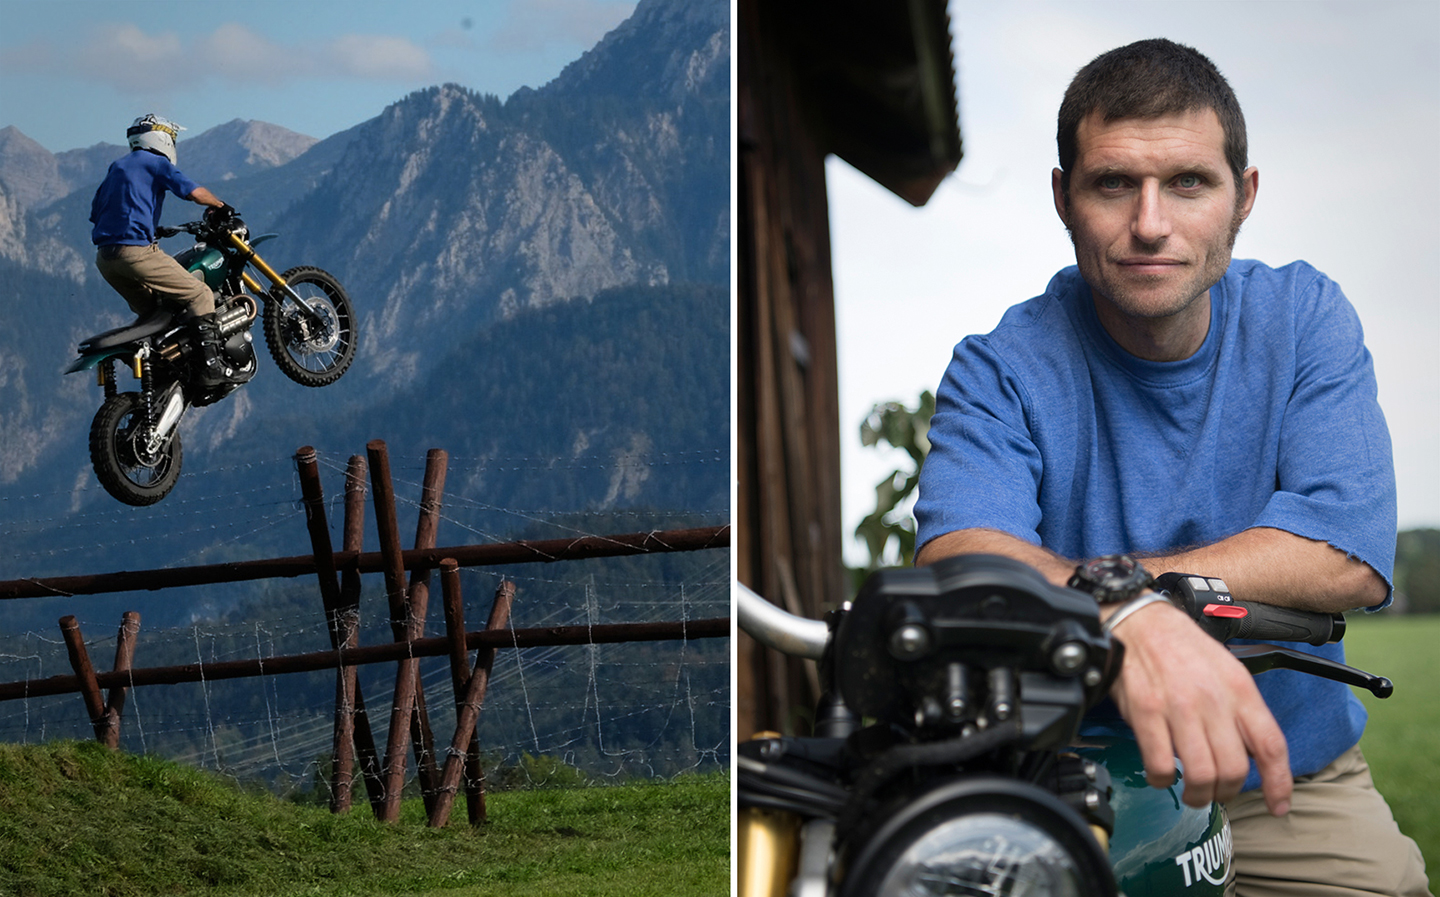 Video: Guy Martin attempts to jump barbed wire fence that foiled Steve McQueen in The Great Escape